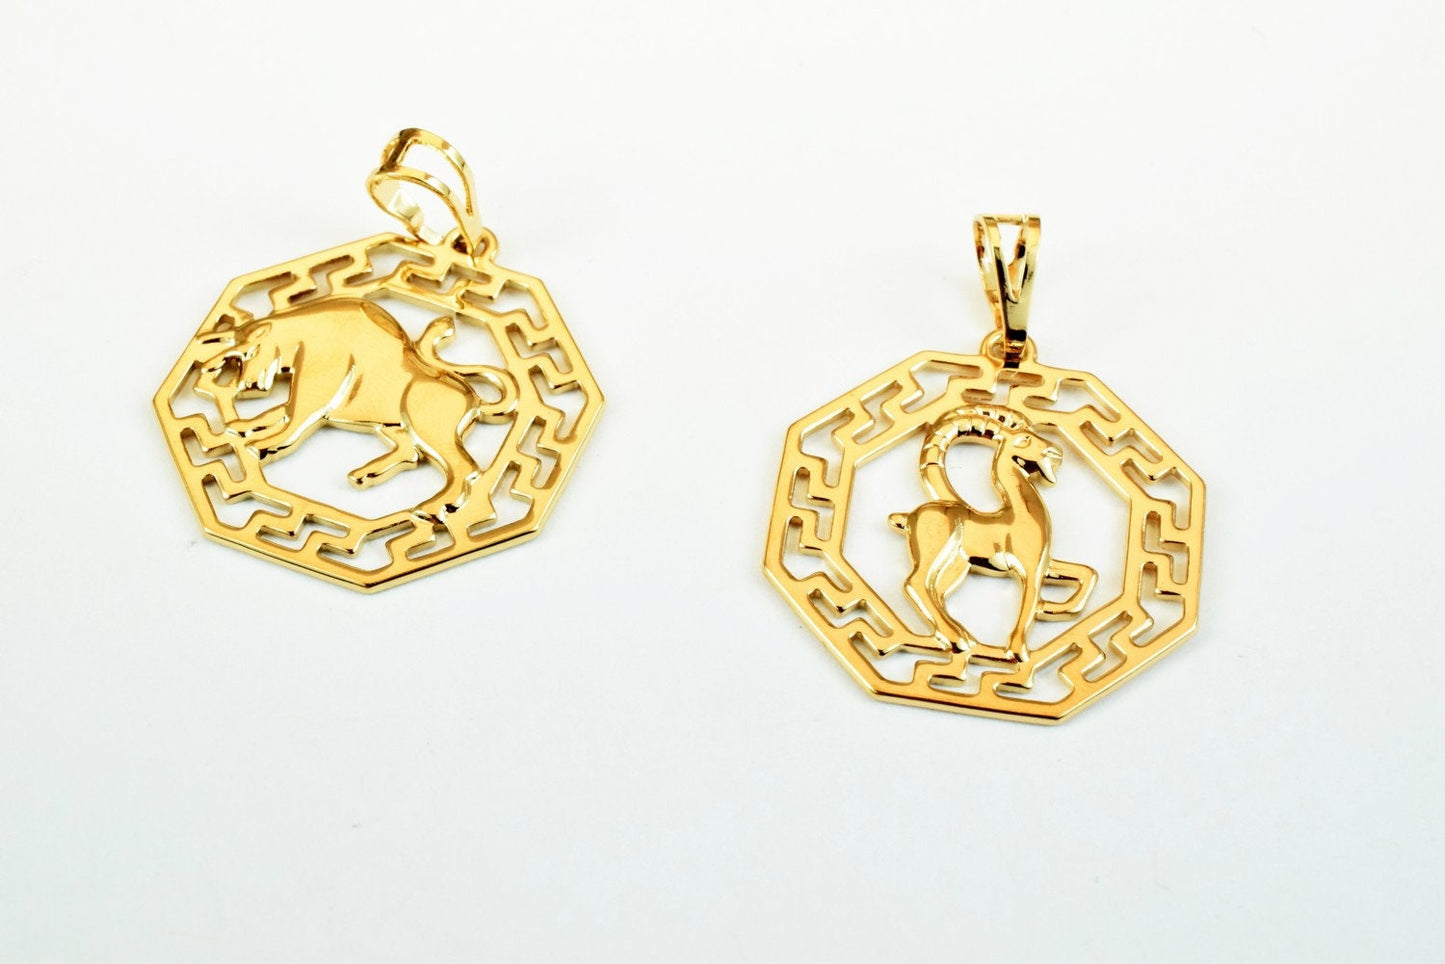 Zodiac Charm Pendants Horoscope Charms Horoscope Pendant Pinky Gold Filled Size 27.5x25mm Zodiac Coin Constellation Charm For Jewelry Making